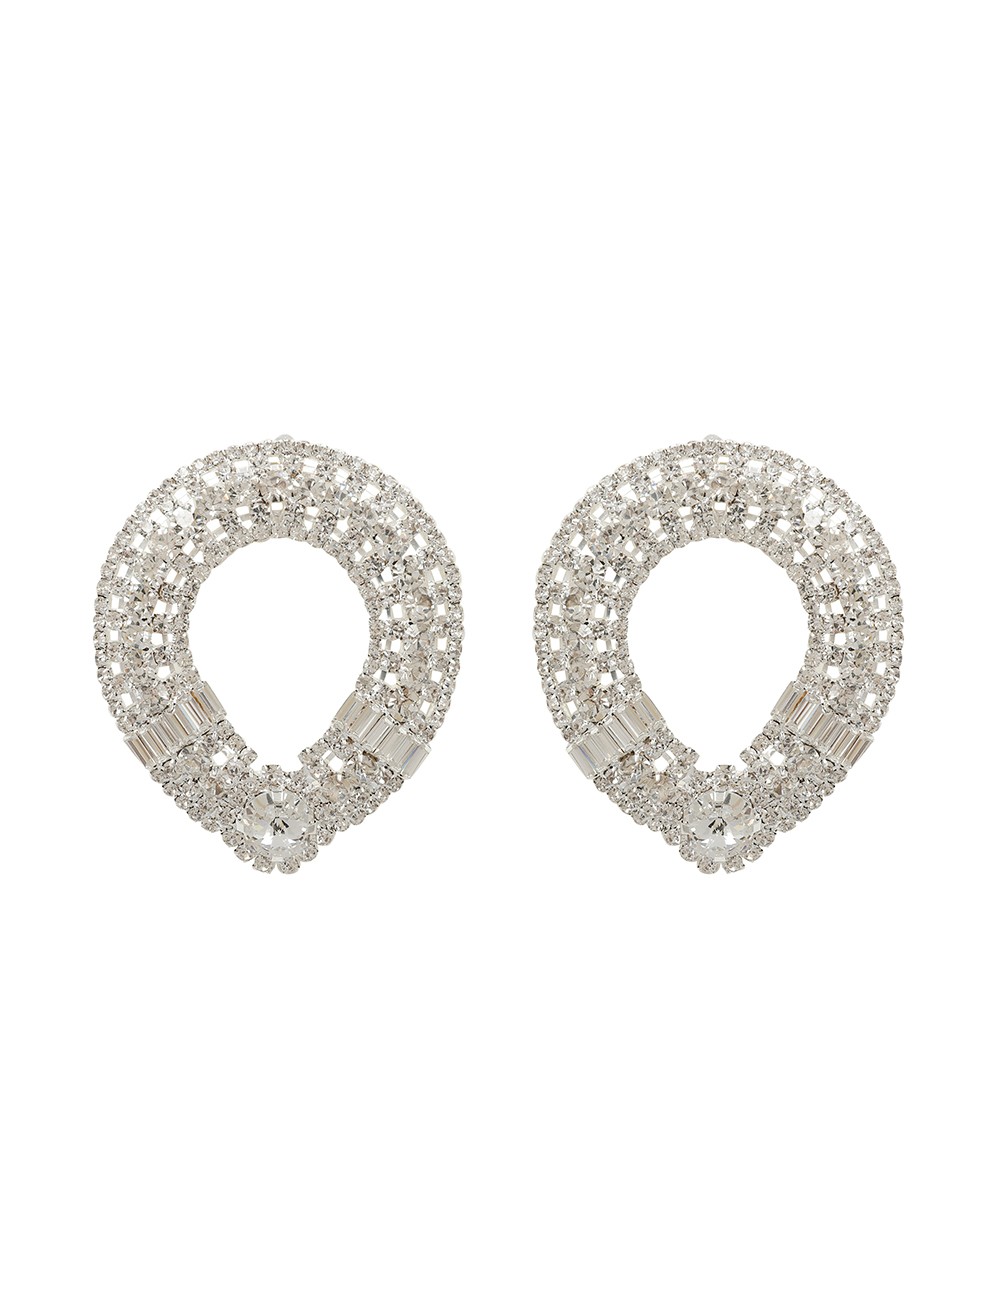 Silver Oval Earrings With Crystals